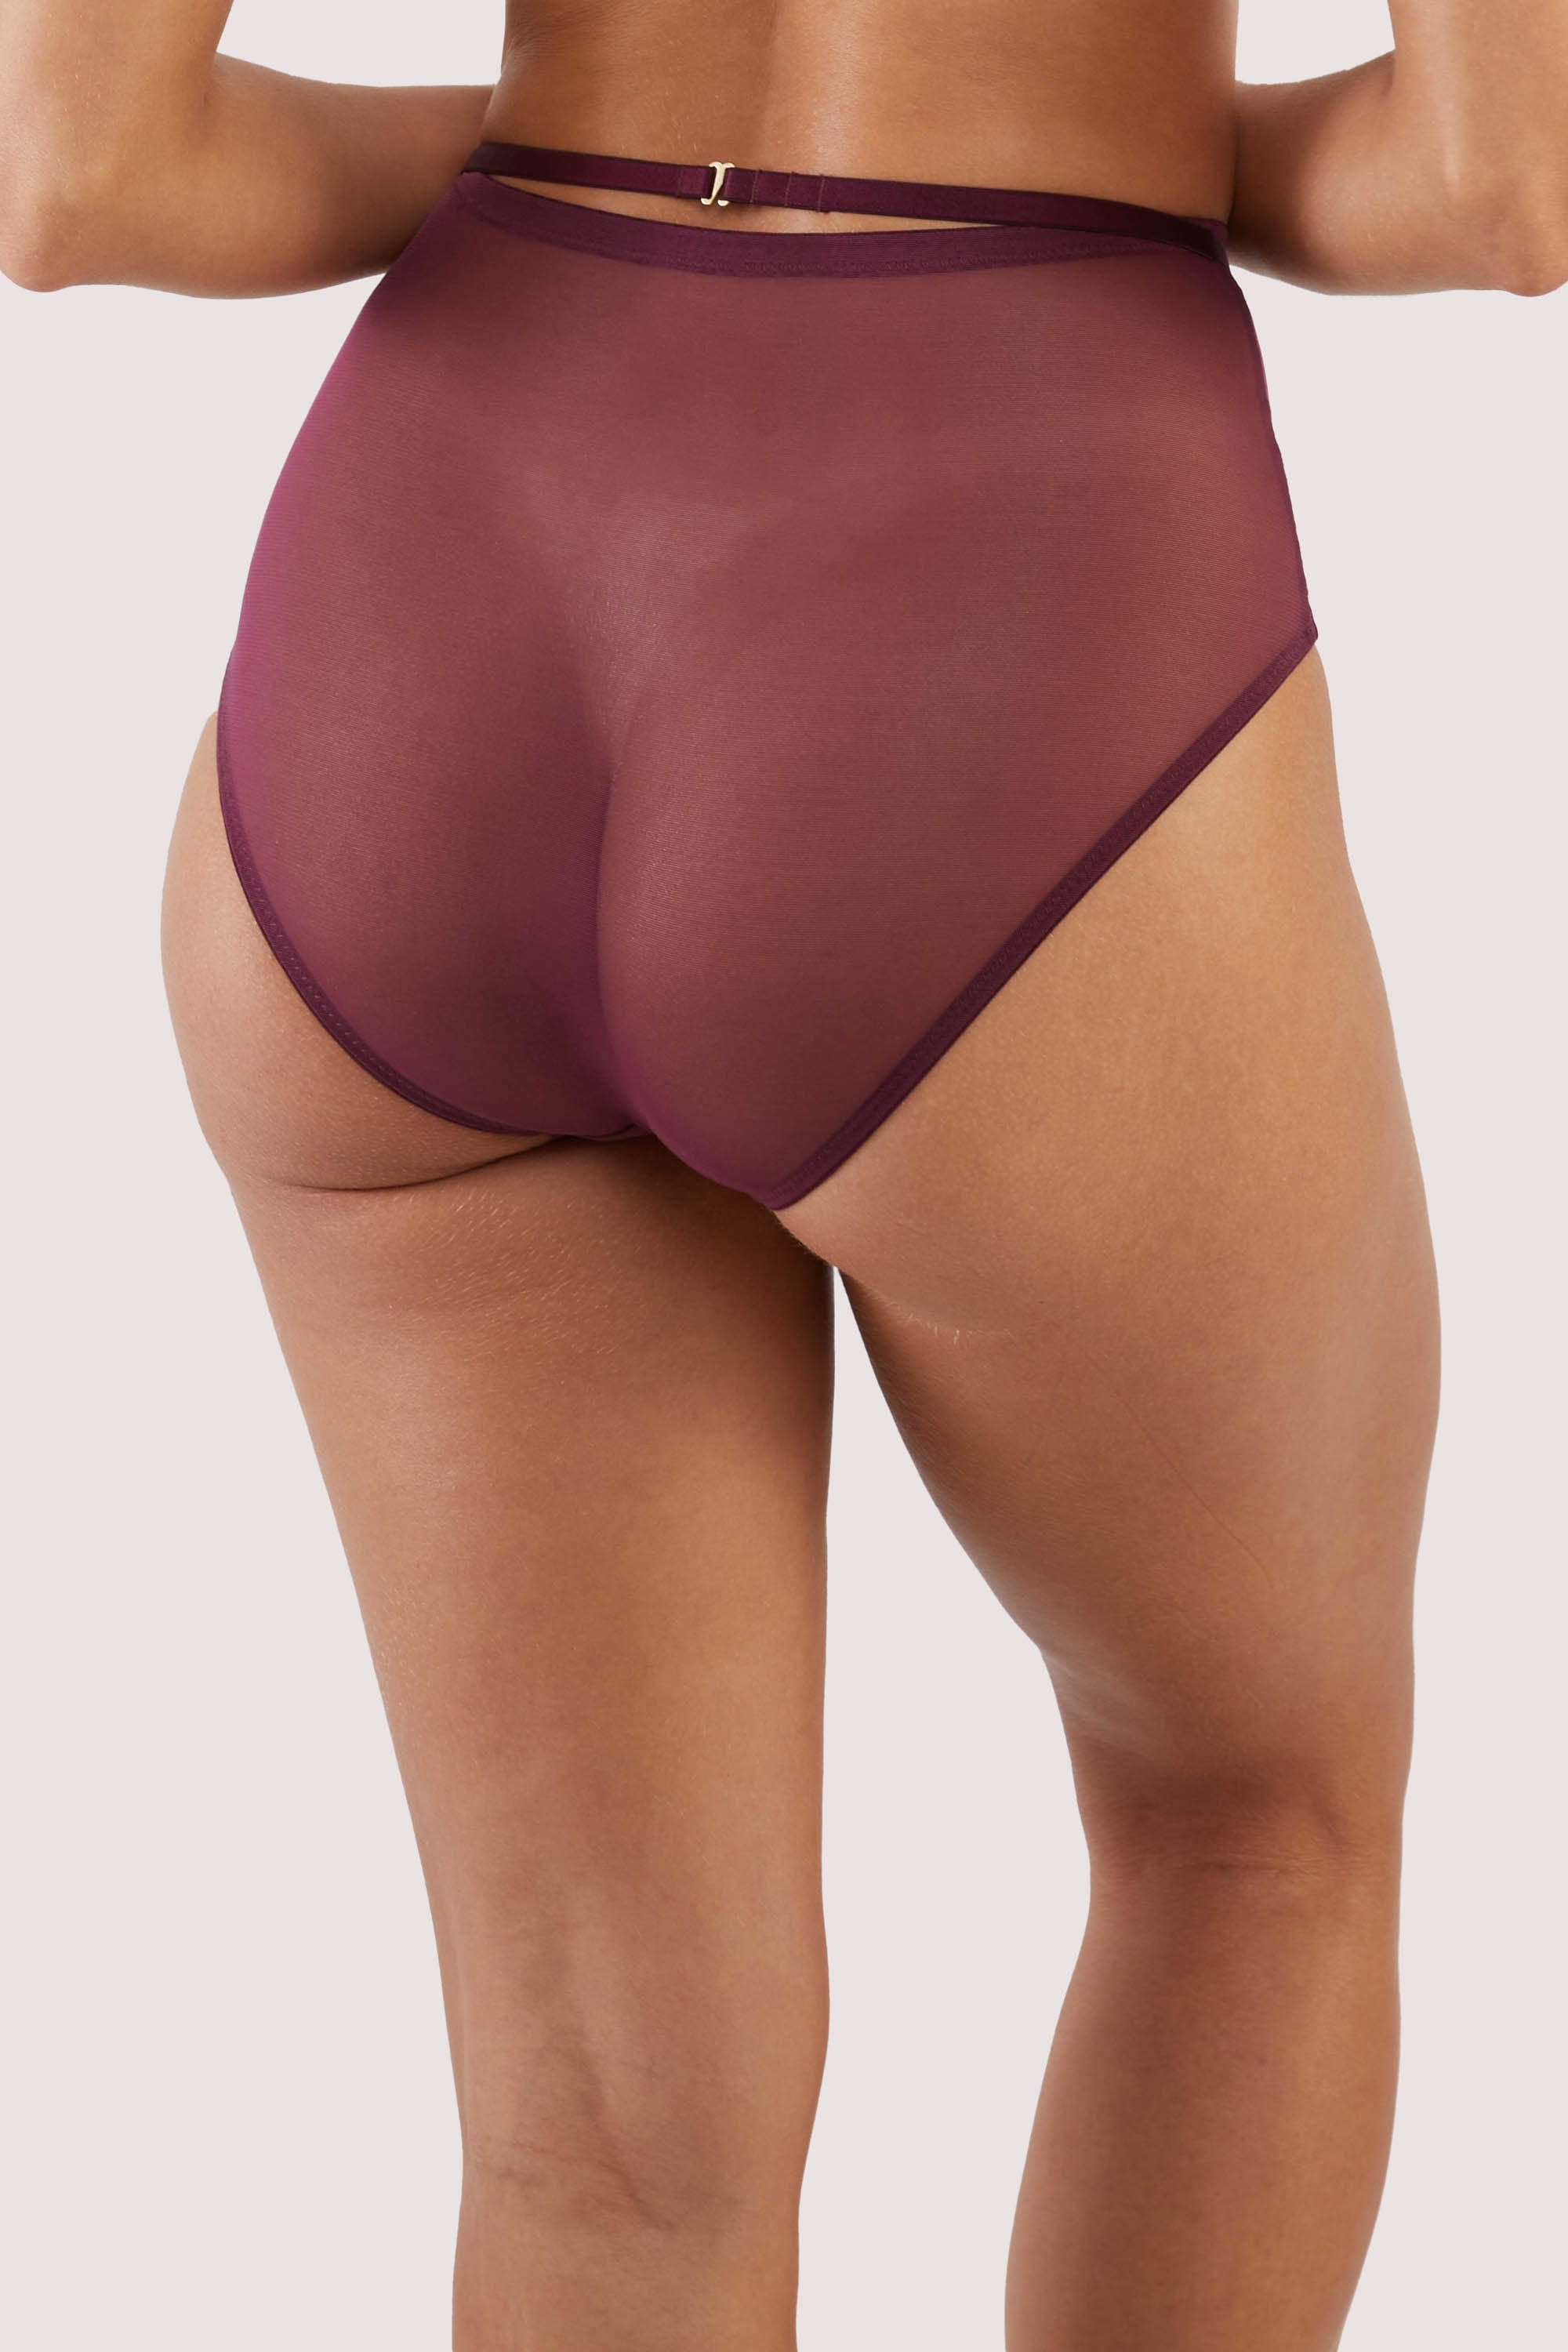 Back view of a harness style brief with mesh overlay and visible gold hardware in a deep wine red/purple.